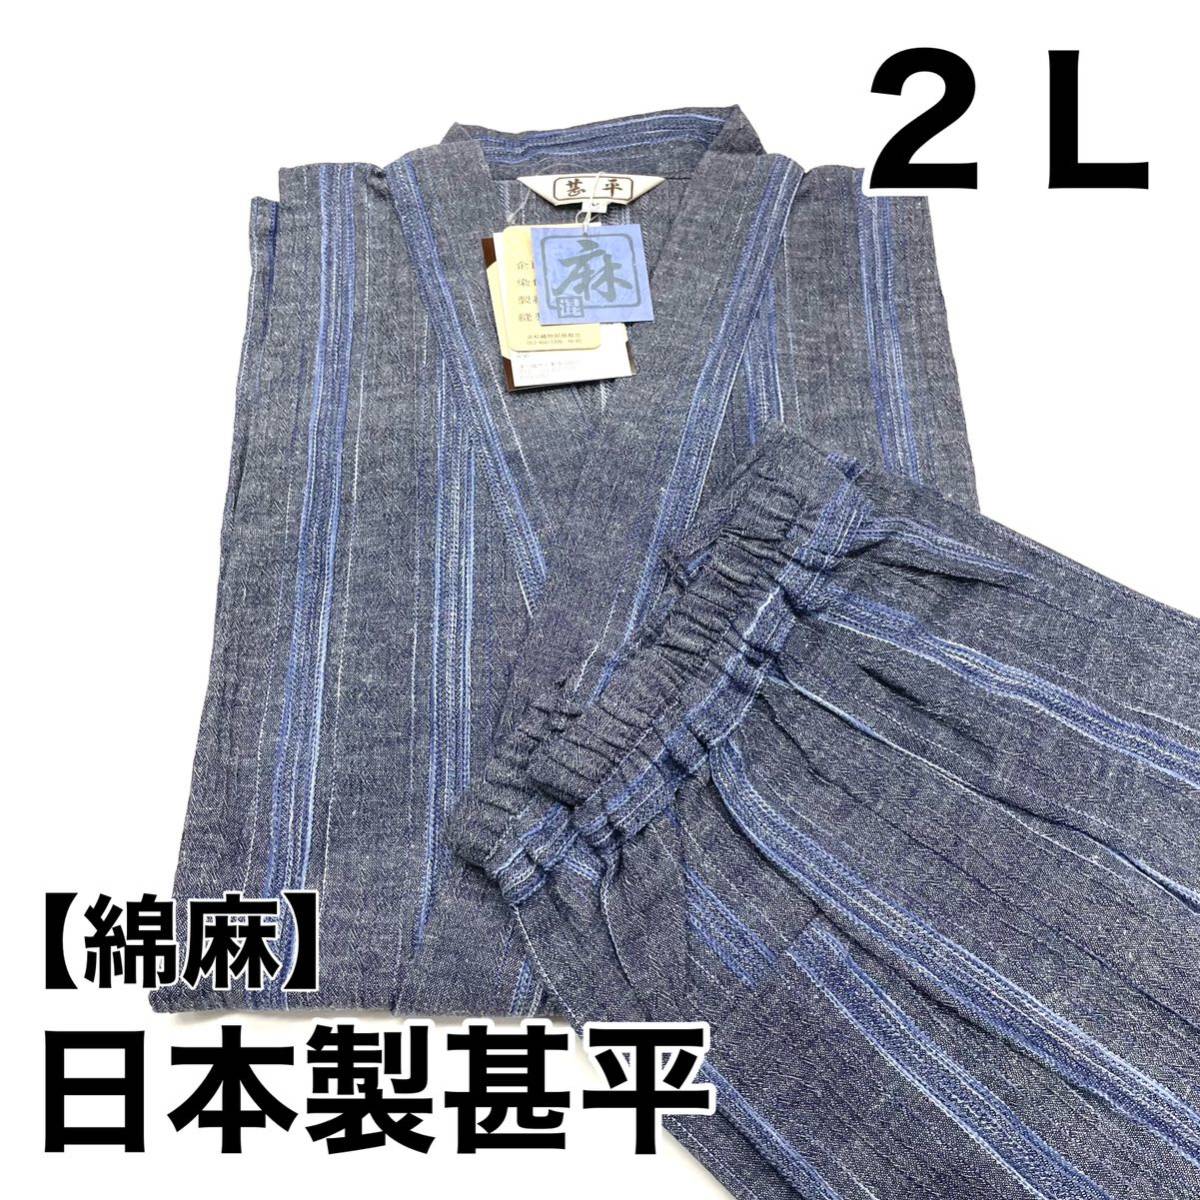  made in Japan man jinbei for adult man for for man jinbei cotton flax cotton flax for summer man man adult domestic production adult jinbei LL size LL 2L size 2L gray 